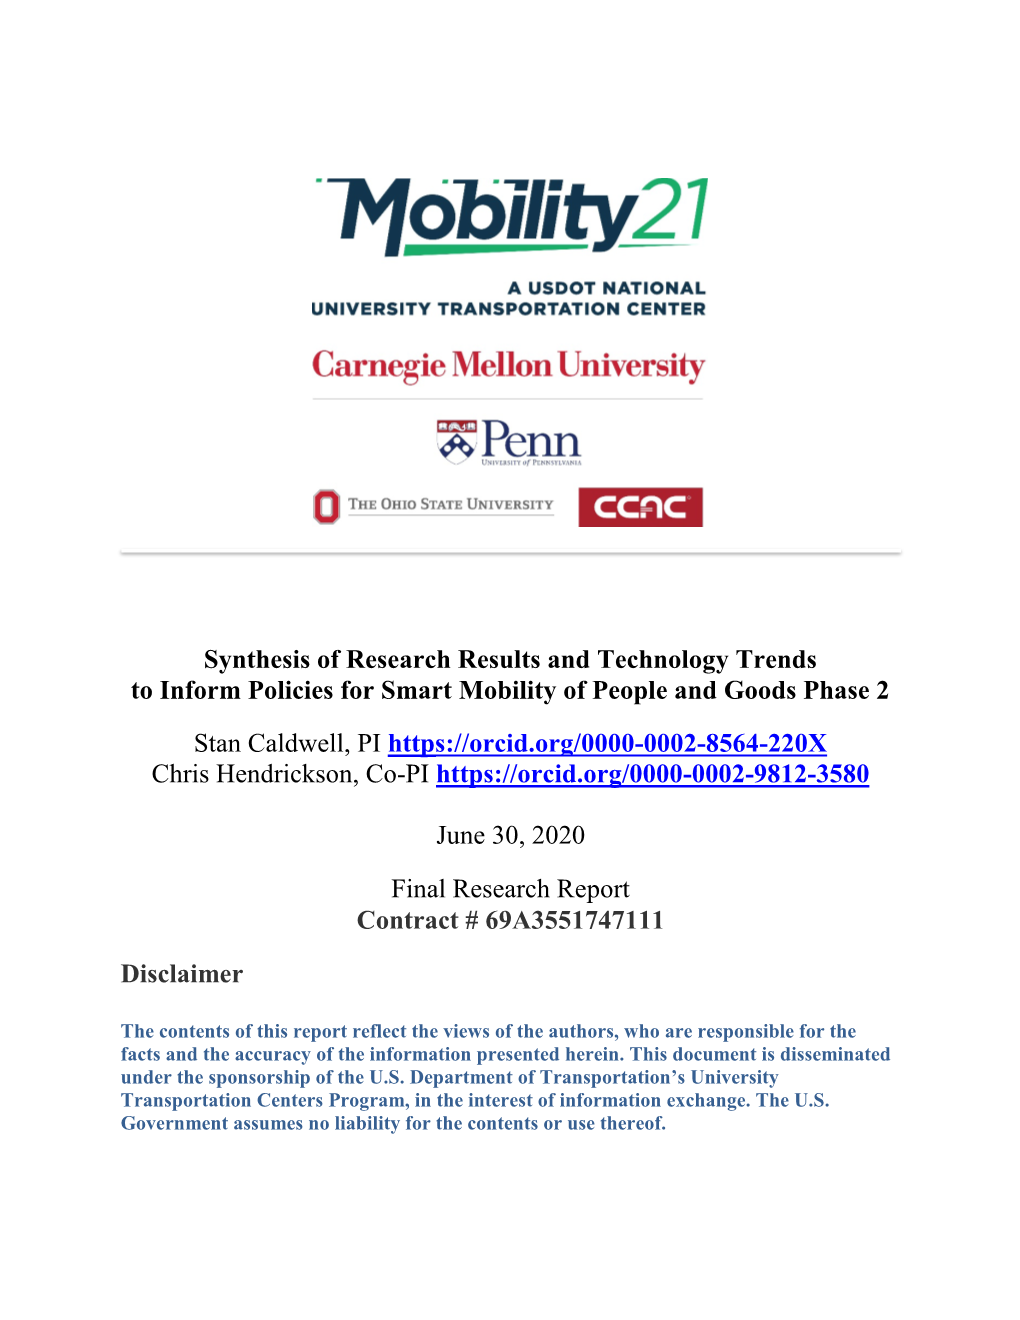 Synthesis of Research Results and Technology Trends to Inform Policies for Smart Mobility of People and Goods Phase 2